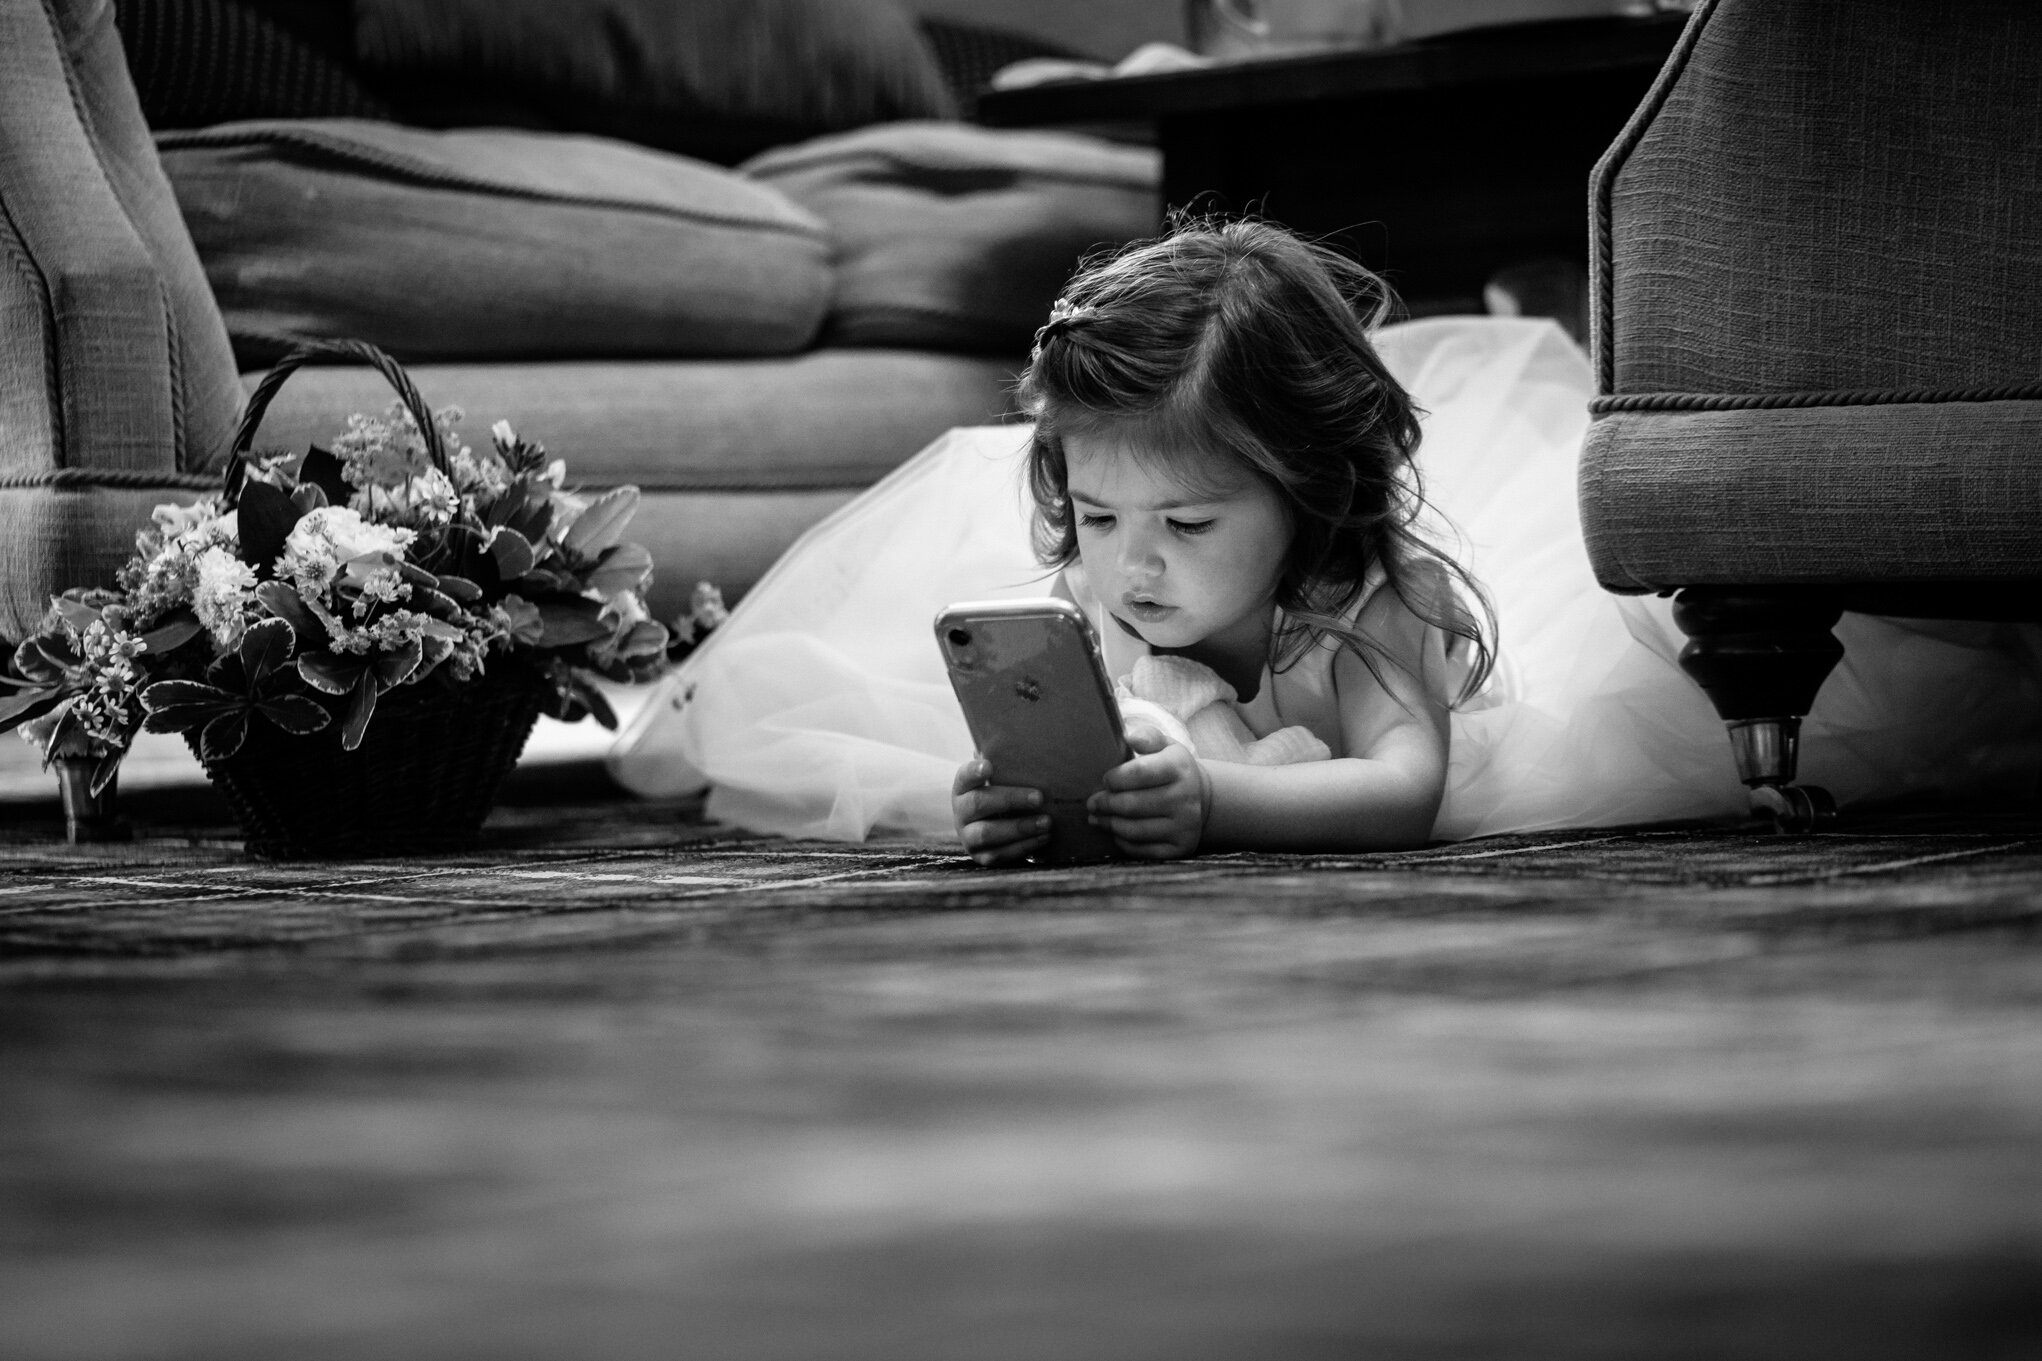 Flower girl playing with phone on floor